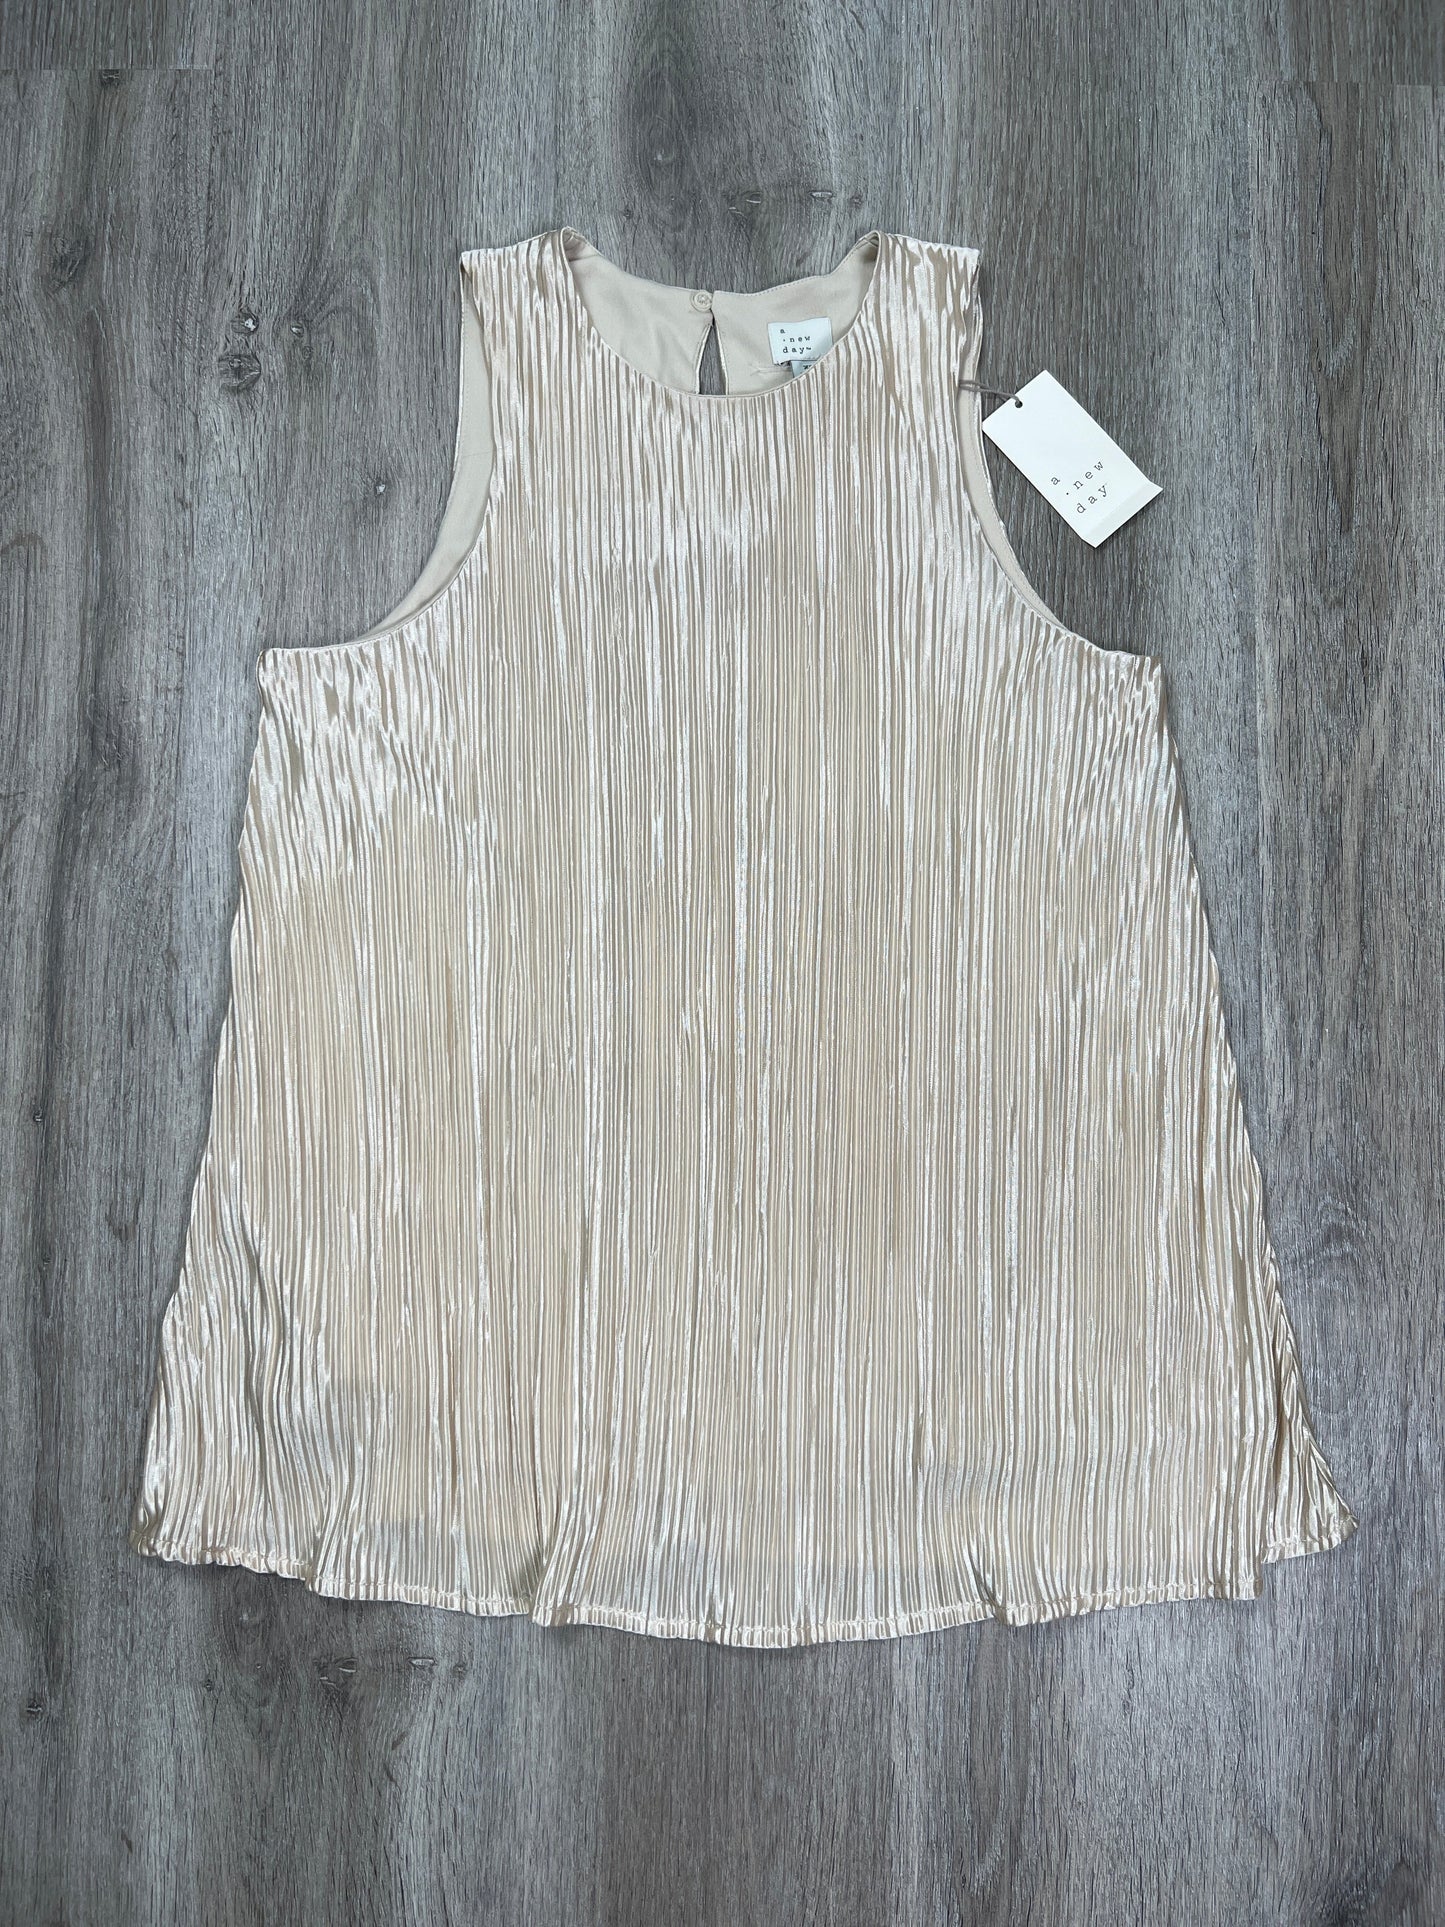 Gold Top Sleeveless A New Day, Size Xs